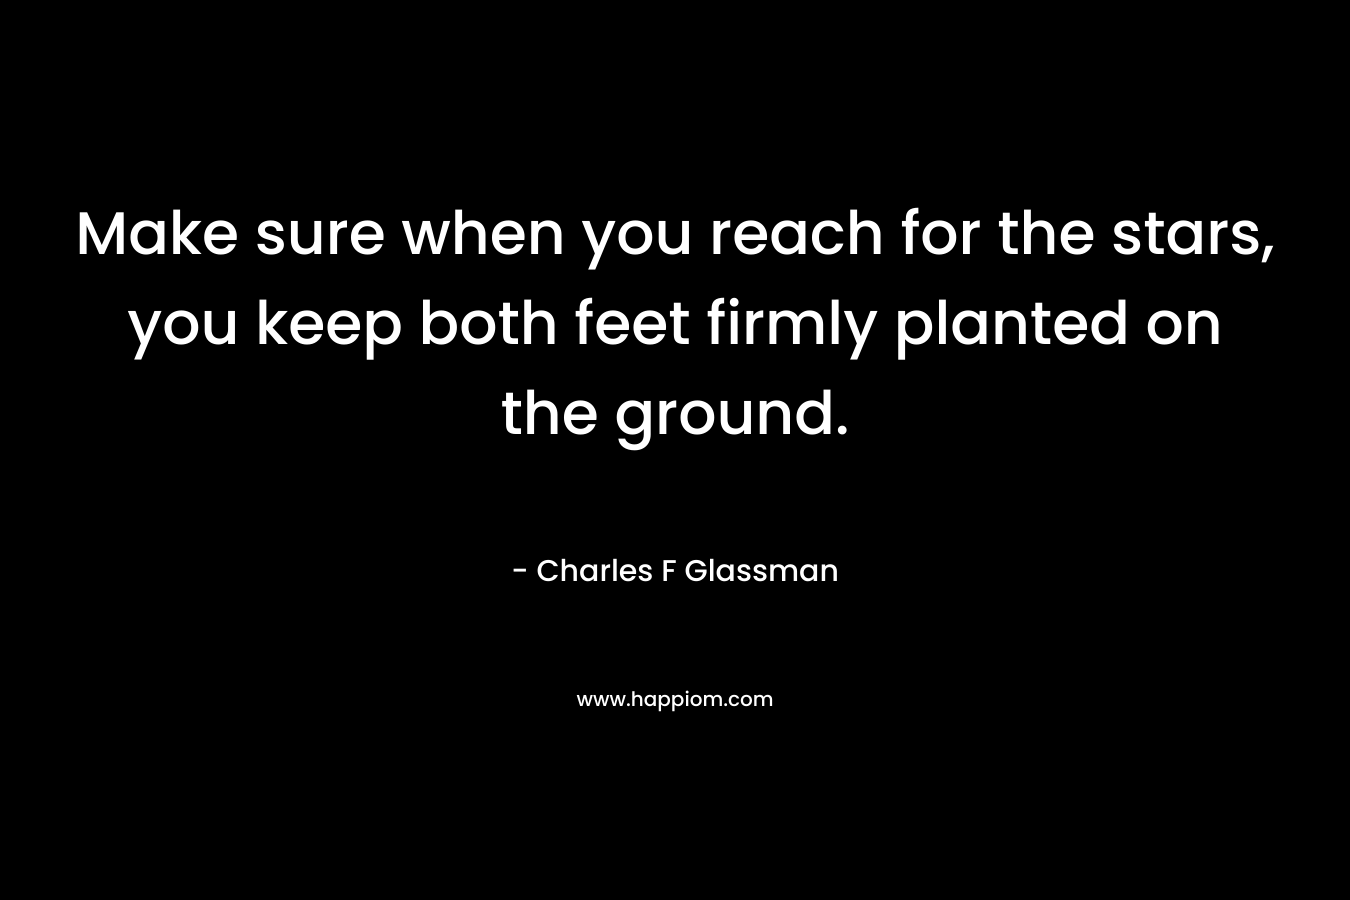 Make sure when you reach for the stars, you keep both feet firmly planted on the ground.